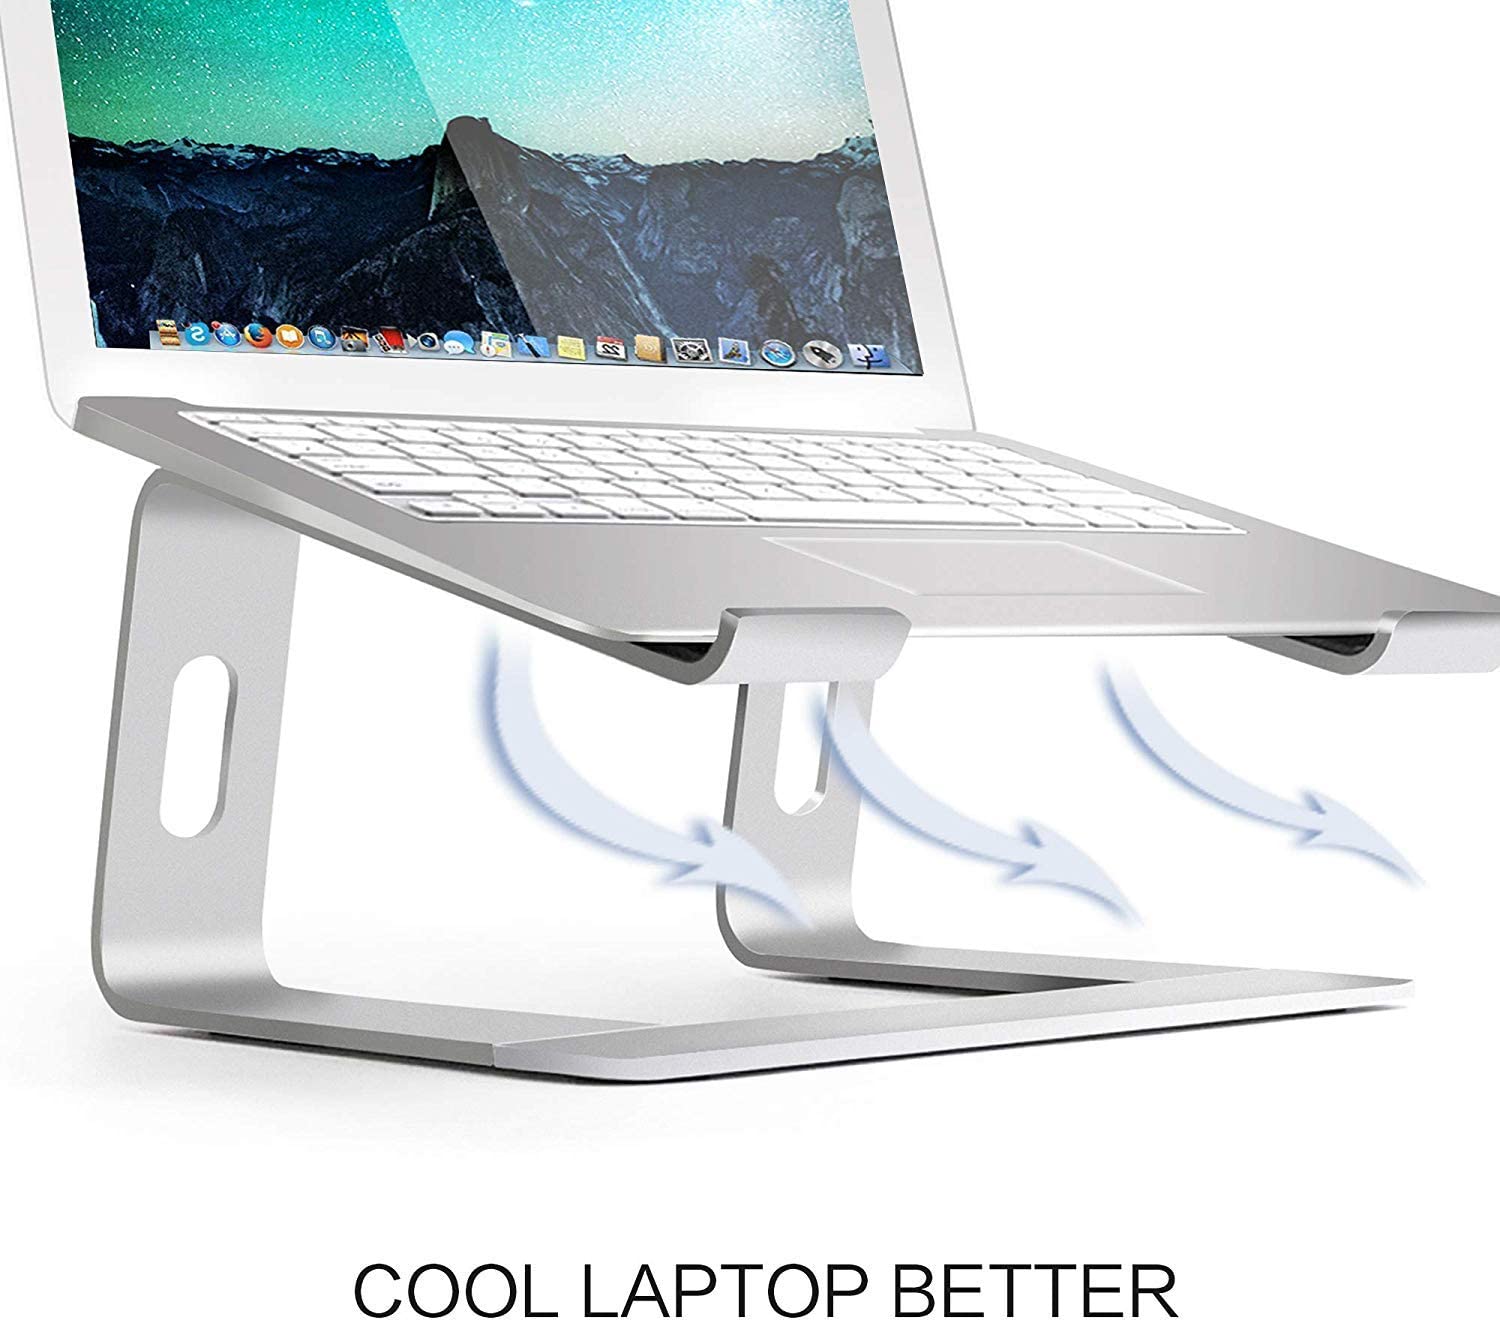 HF-LSH: Aluminum Laptop Stand for Desk Compatible with Mac MacBook Pro Air Apple Notebook, Portable Holder - Click Image to Close